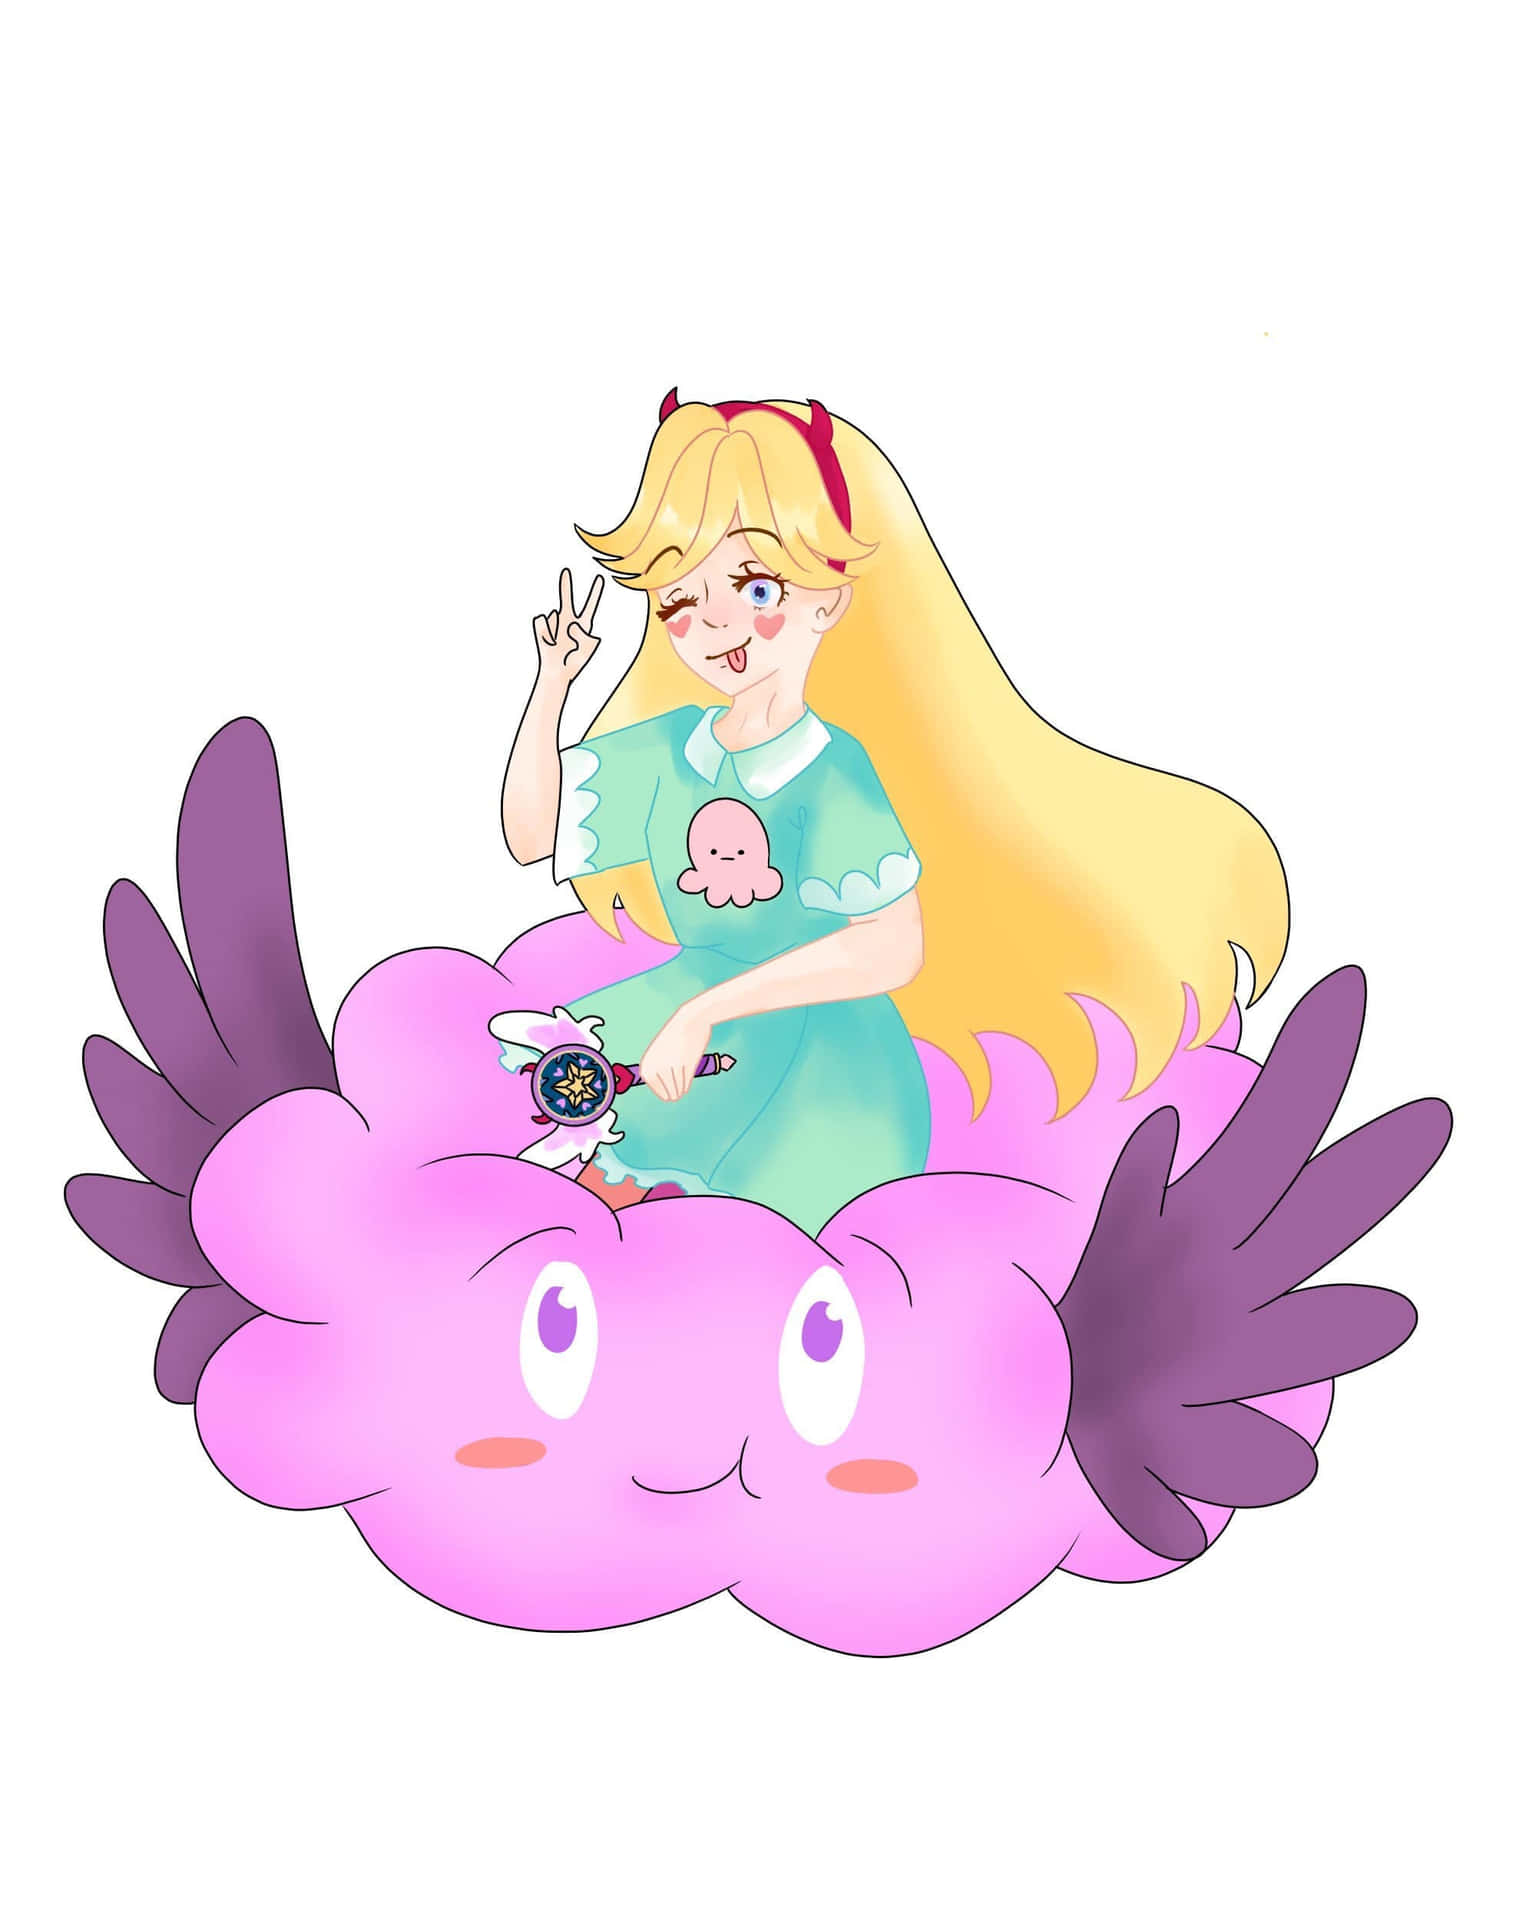 "Star and Marco Fly Off on Another Adventure!"